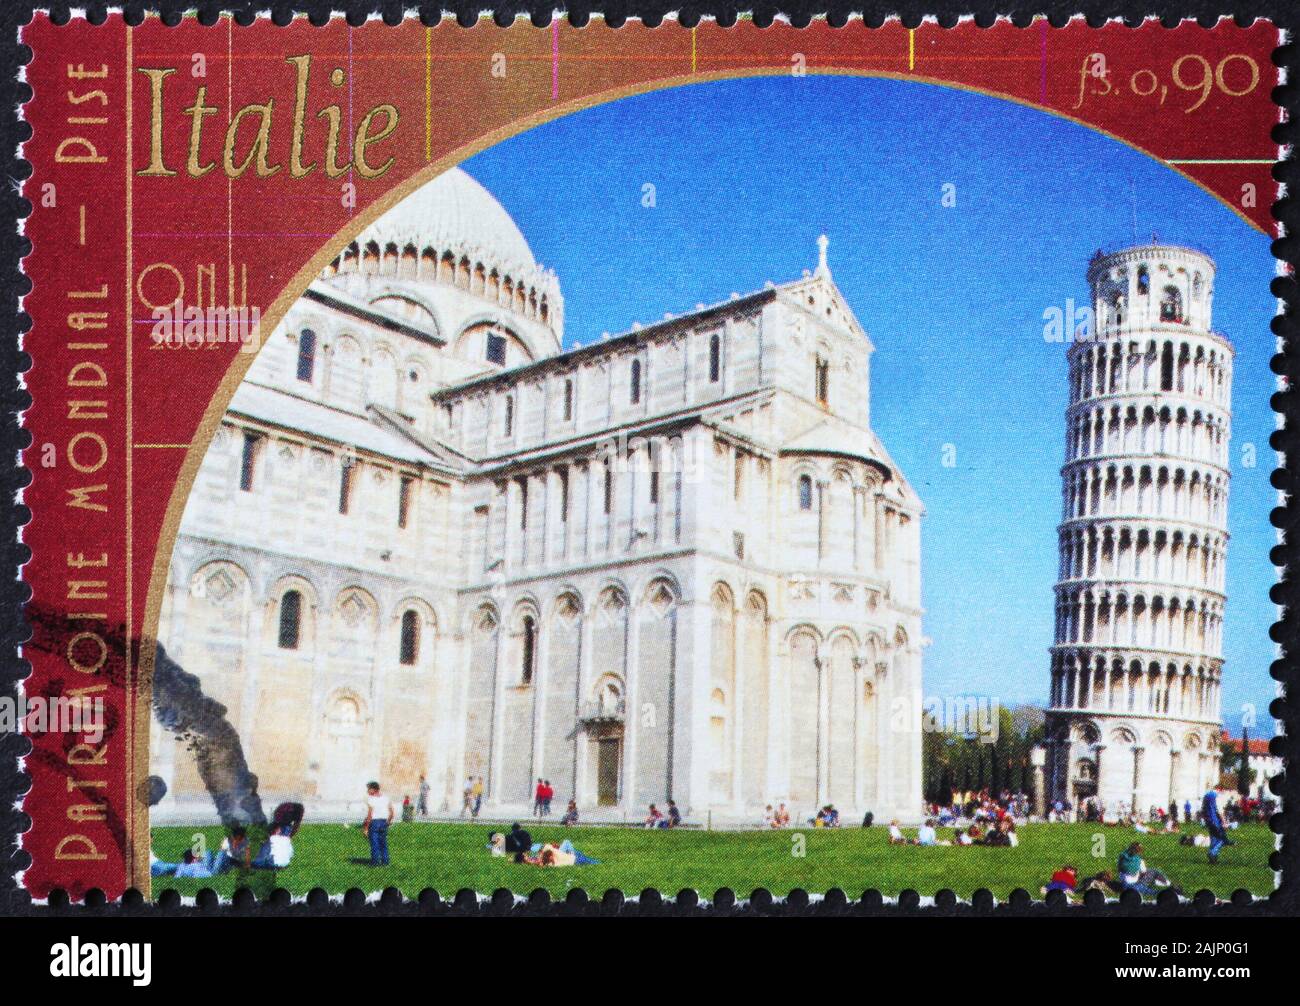 Piazza dei Miracoli in Pisa on postage stamp Stock Photo